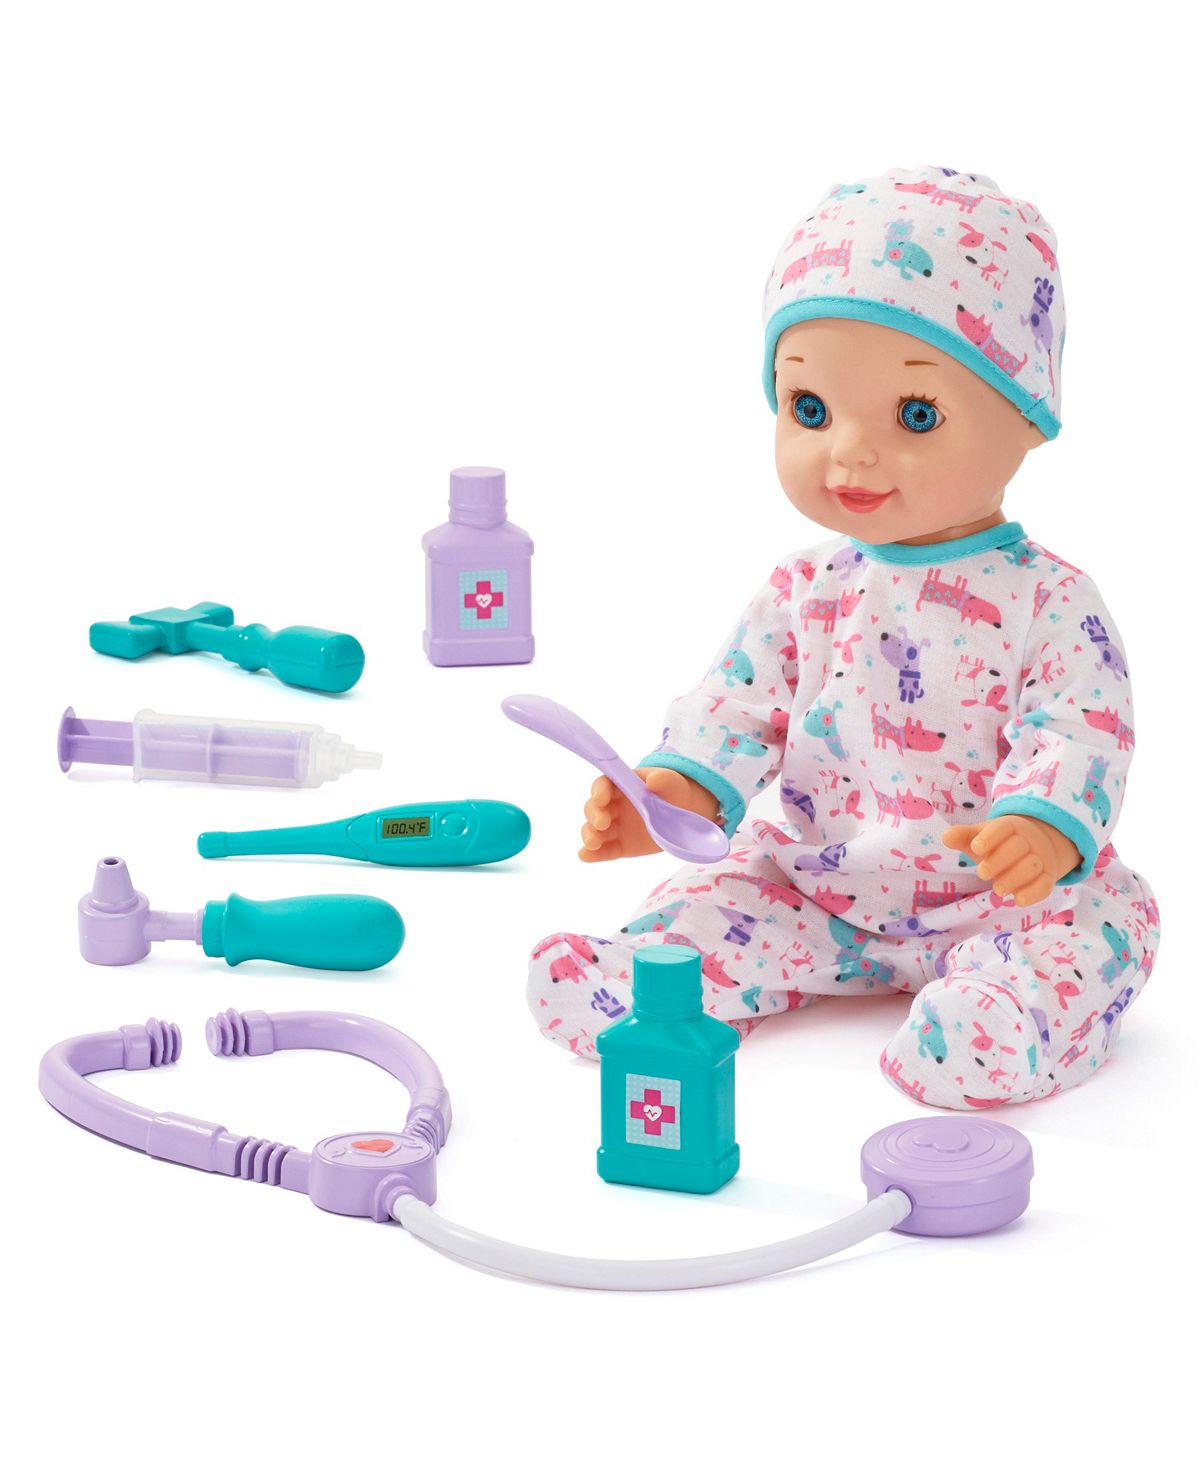 Toys R Us 14" Get Well Baby Doll Set with Medical Accessories